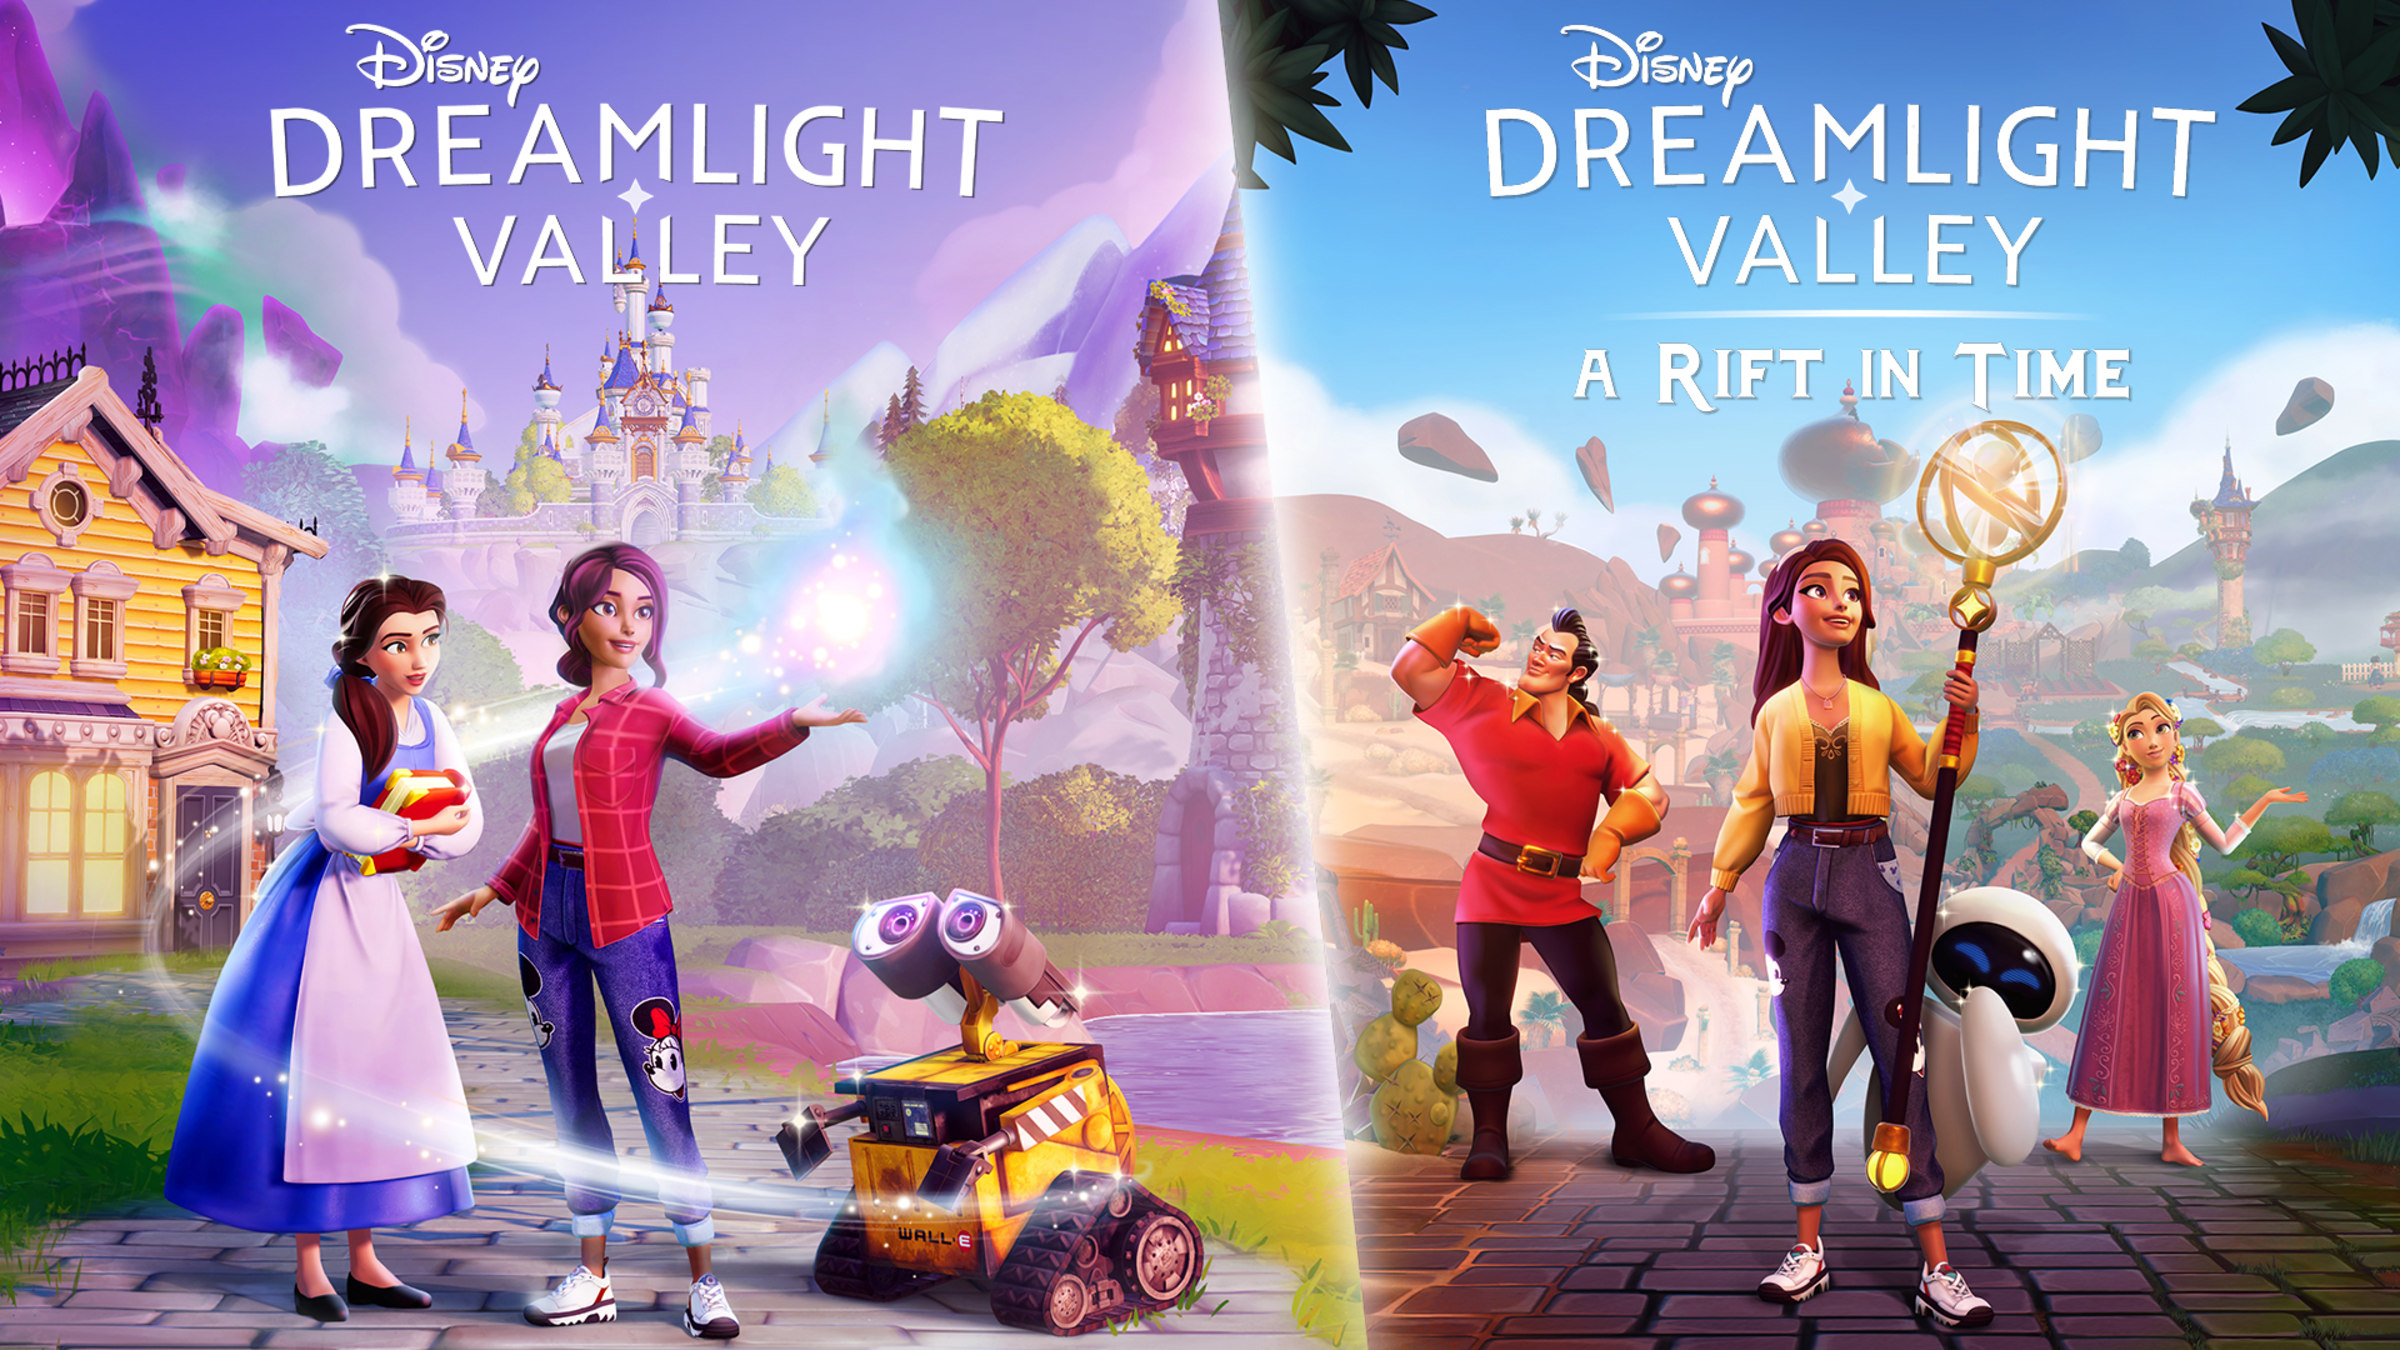 Disney Dreamlight Valley: A Rift in Time